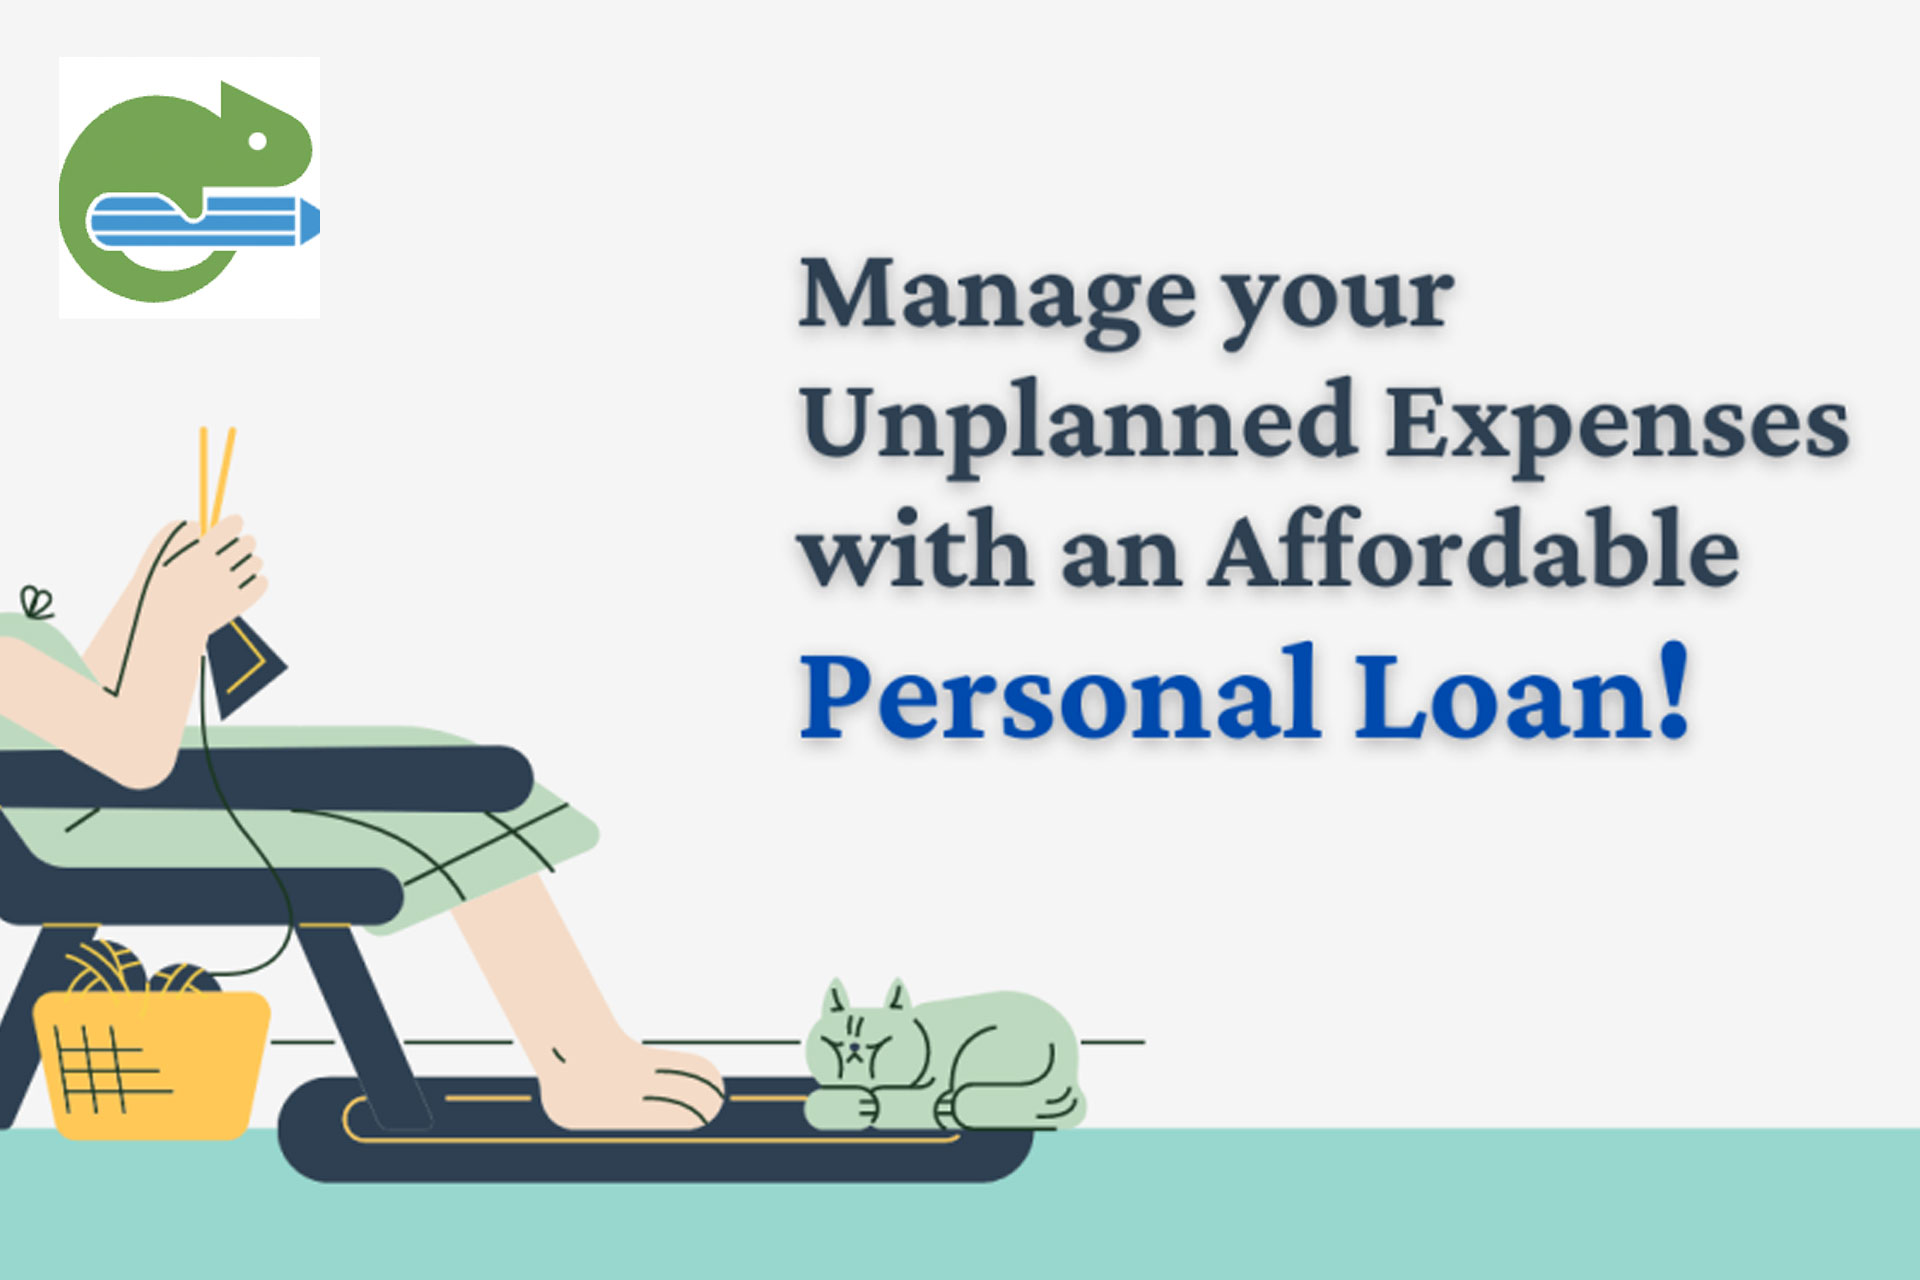 Manage your Unplanned Expenses with an Affordable Personal Loan!